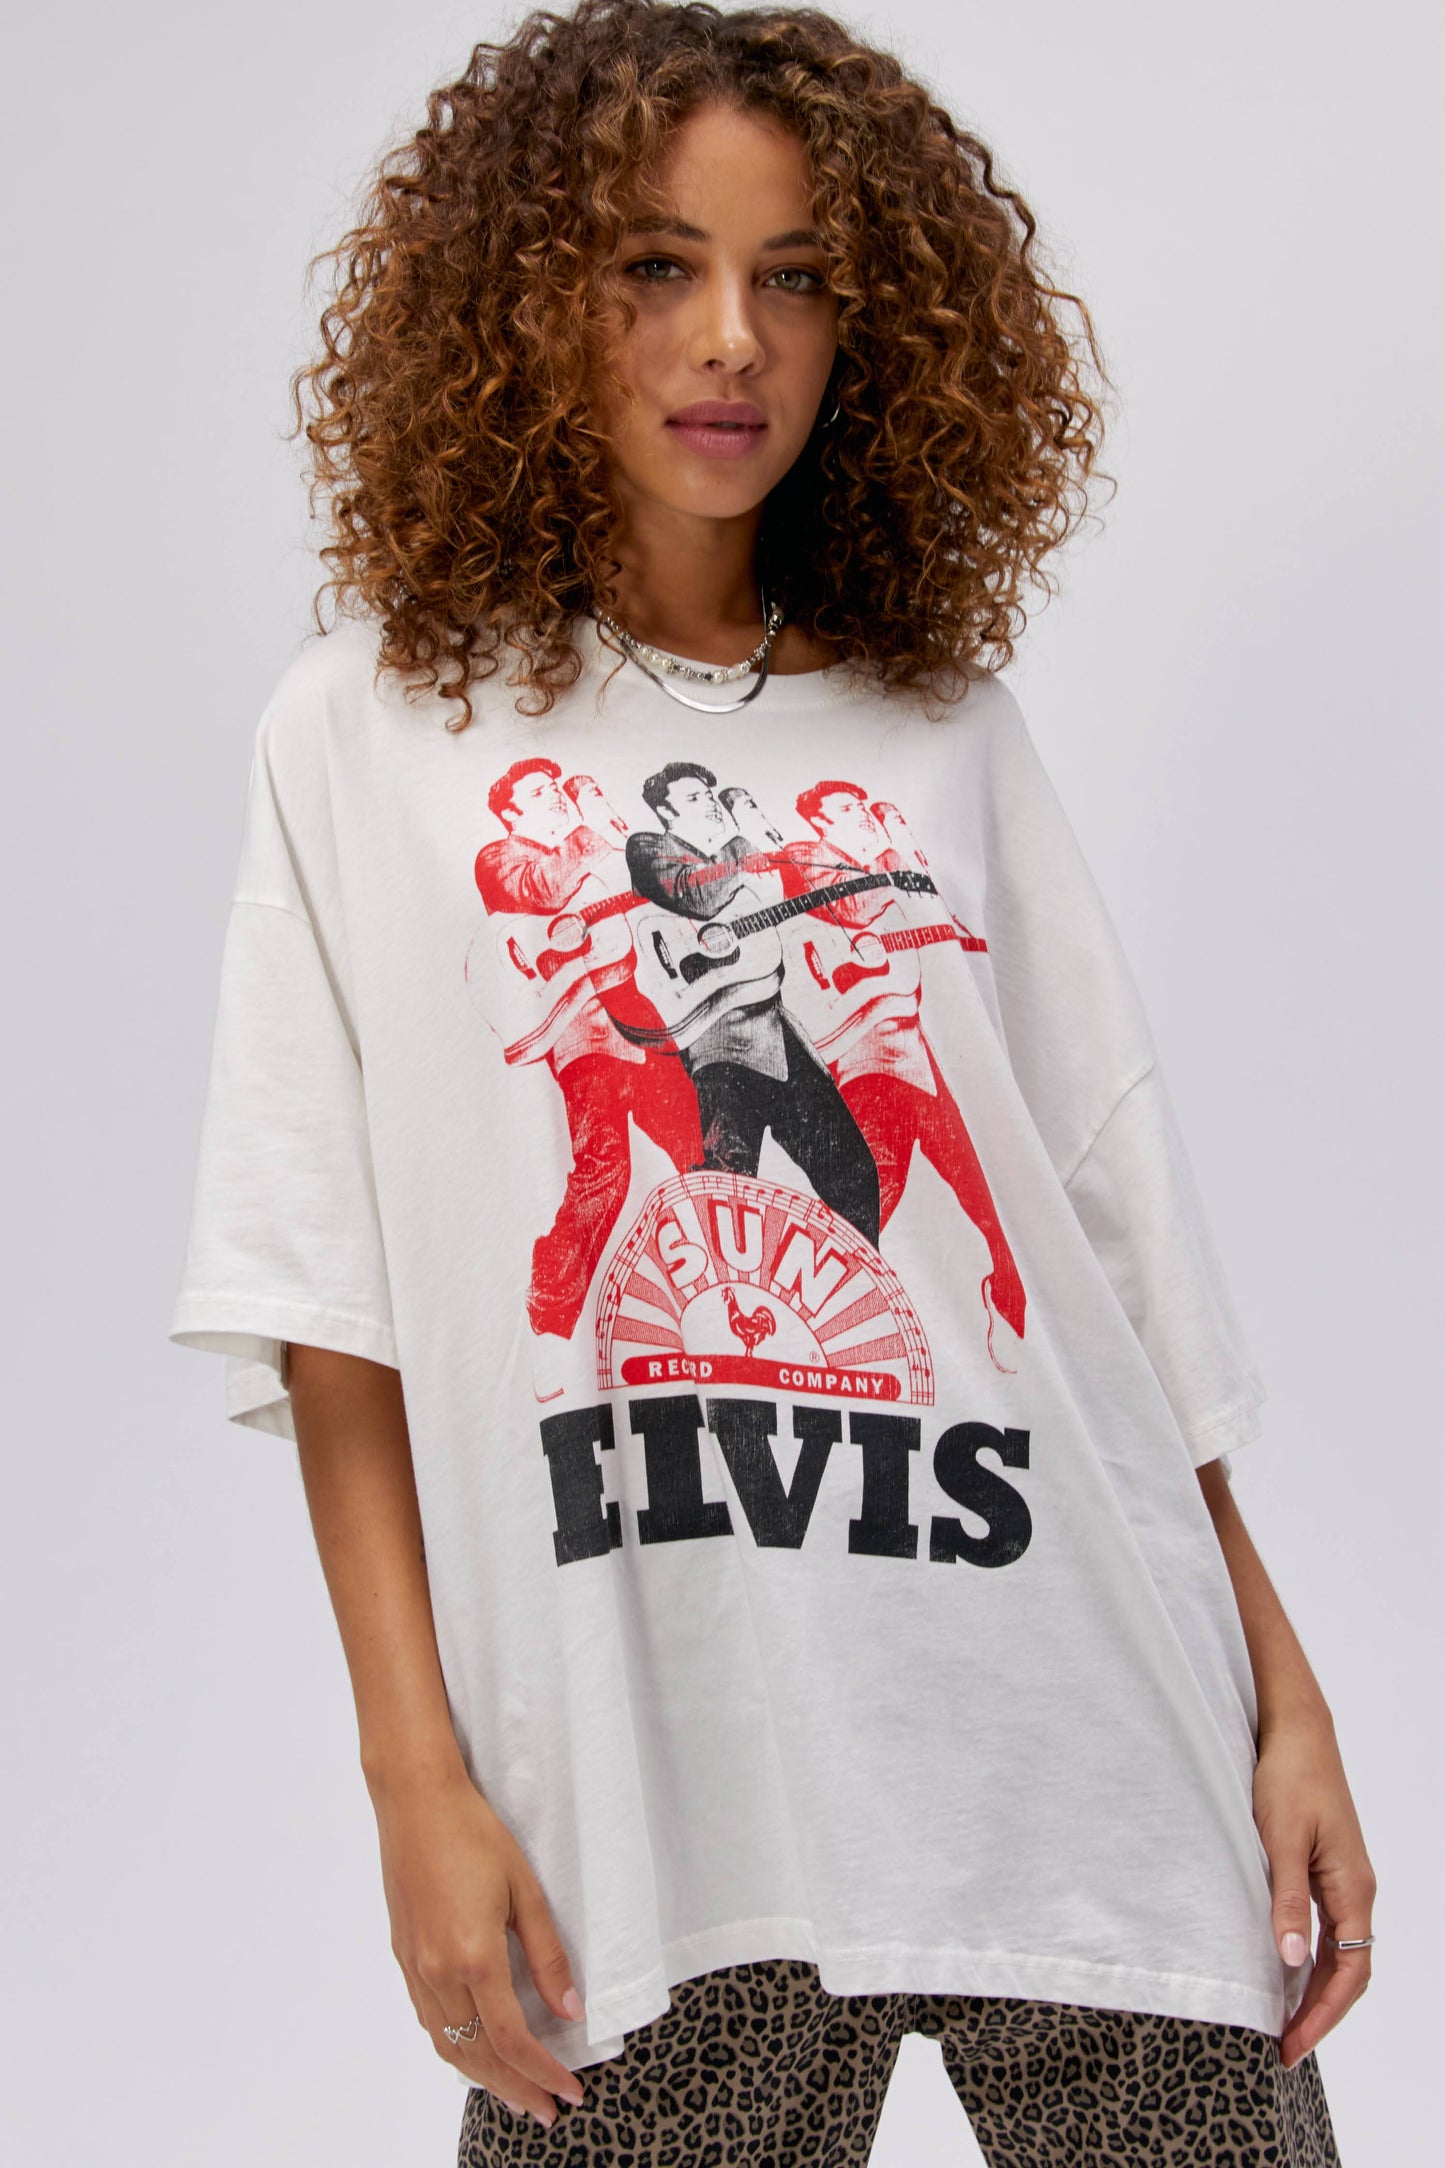 A curly-haired model featuring a white tee stamped with the legendary artist's name and his iconic portrait in red and black inks.